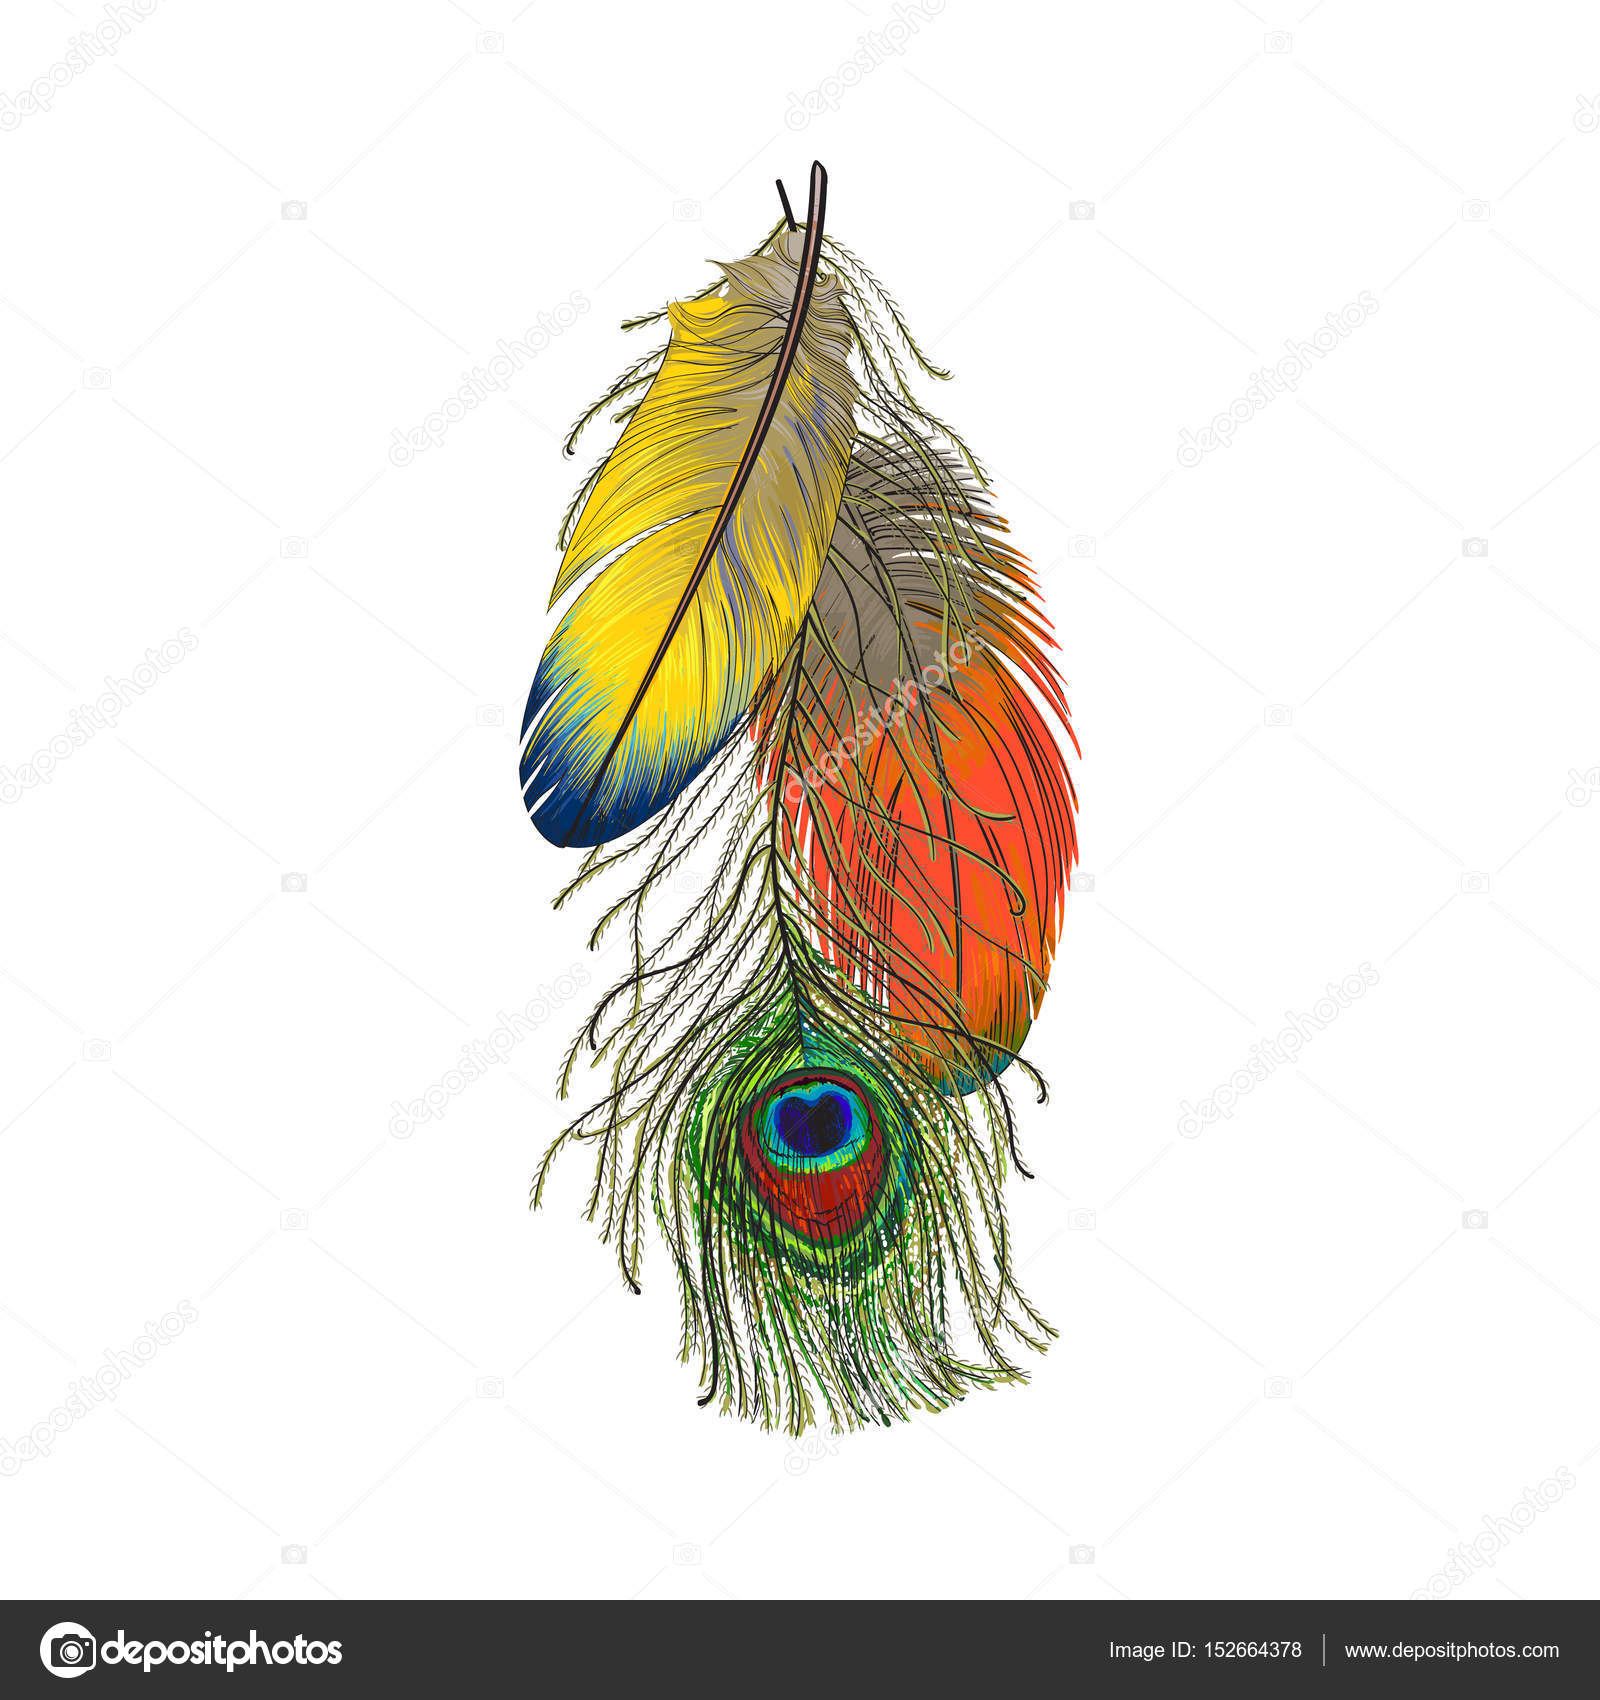 Hand drawn set of various colorful bird feathers Vector Image